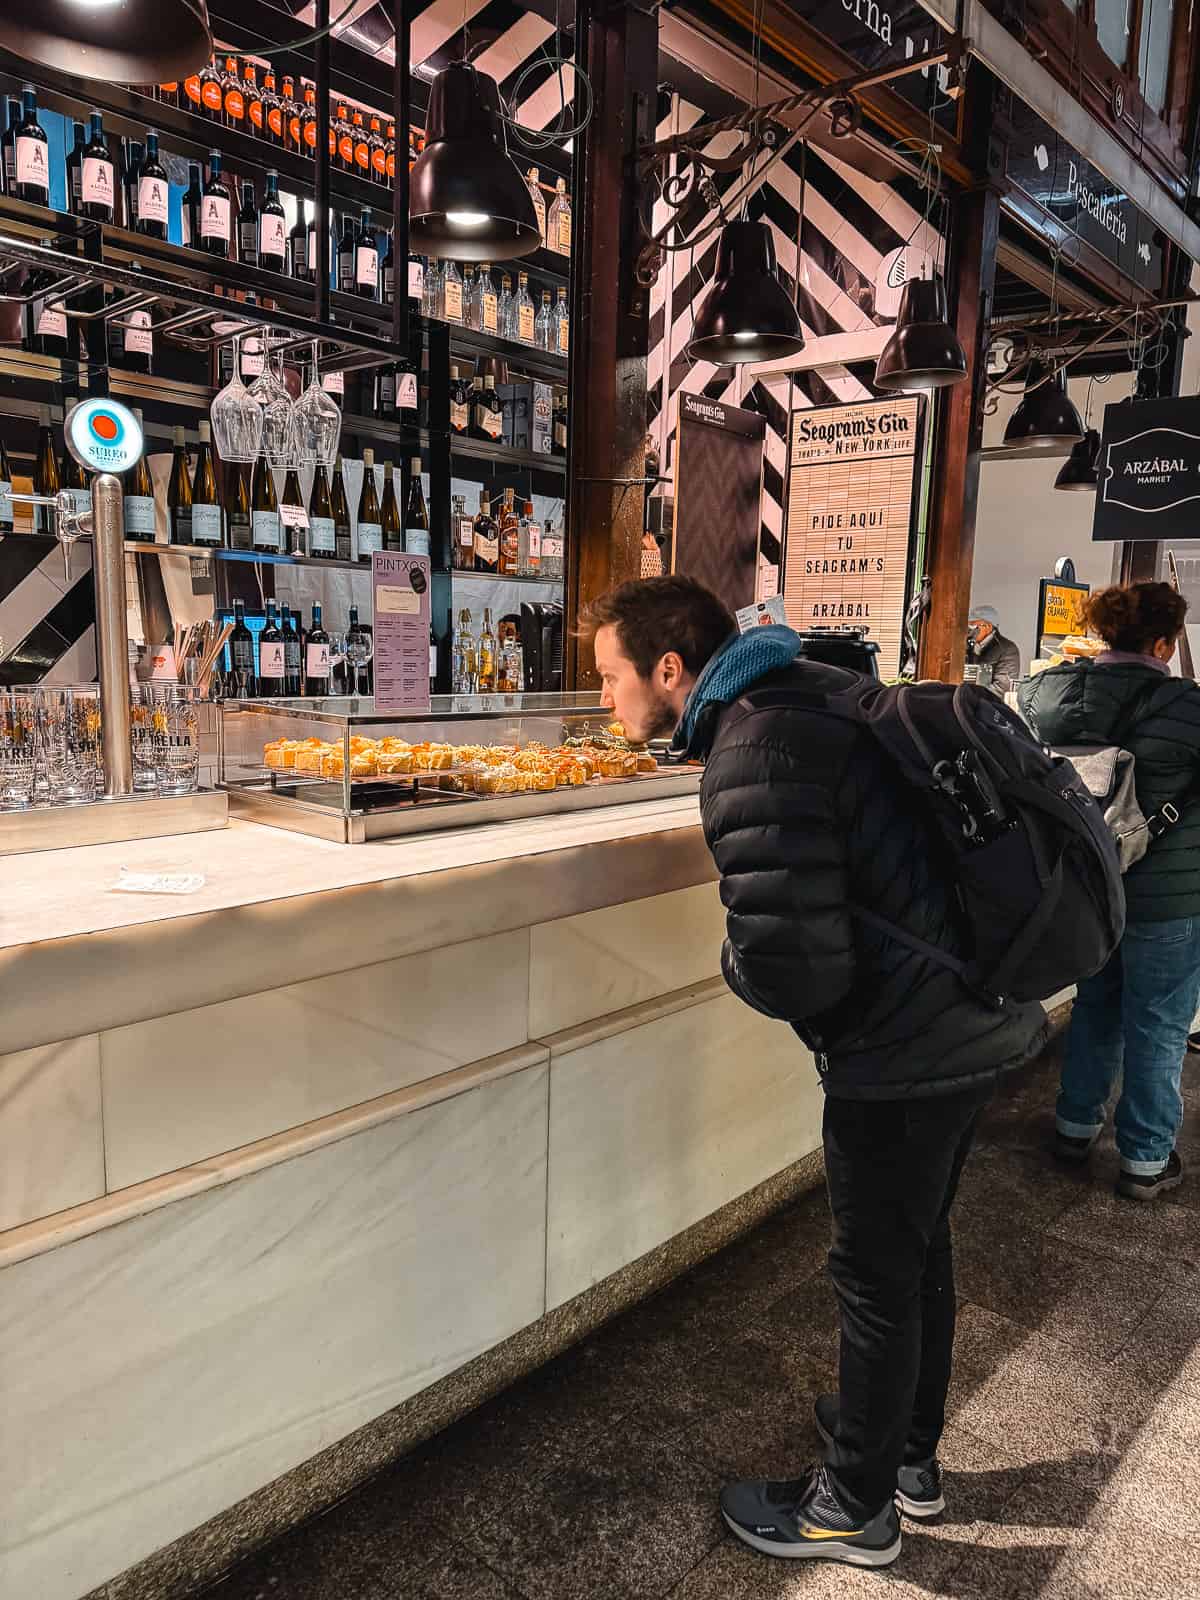 A patron peruses the offerings at a bustling market bar, with a variety of gin bottles on display above and an array of tapas in the foreground, showcasing a slice of local gastronomy and nightlife